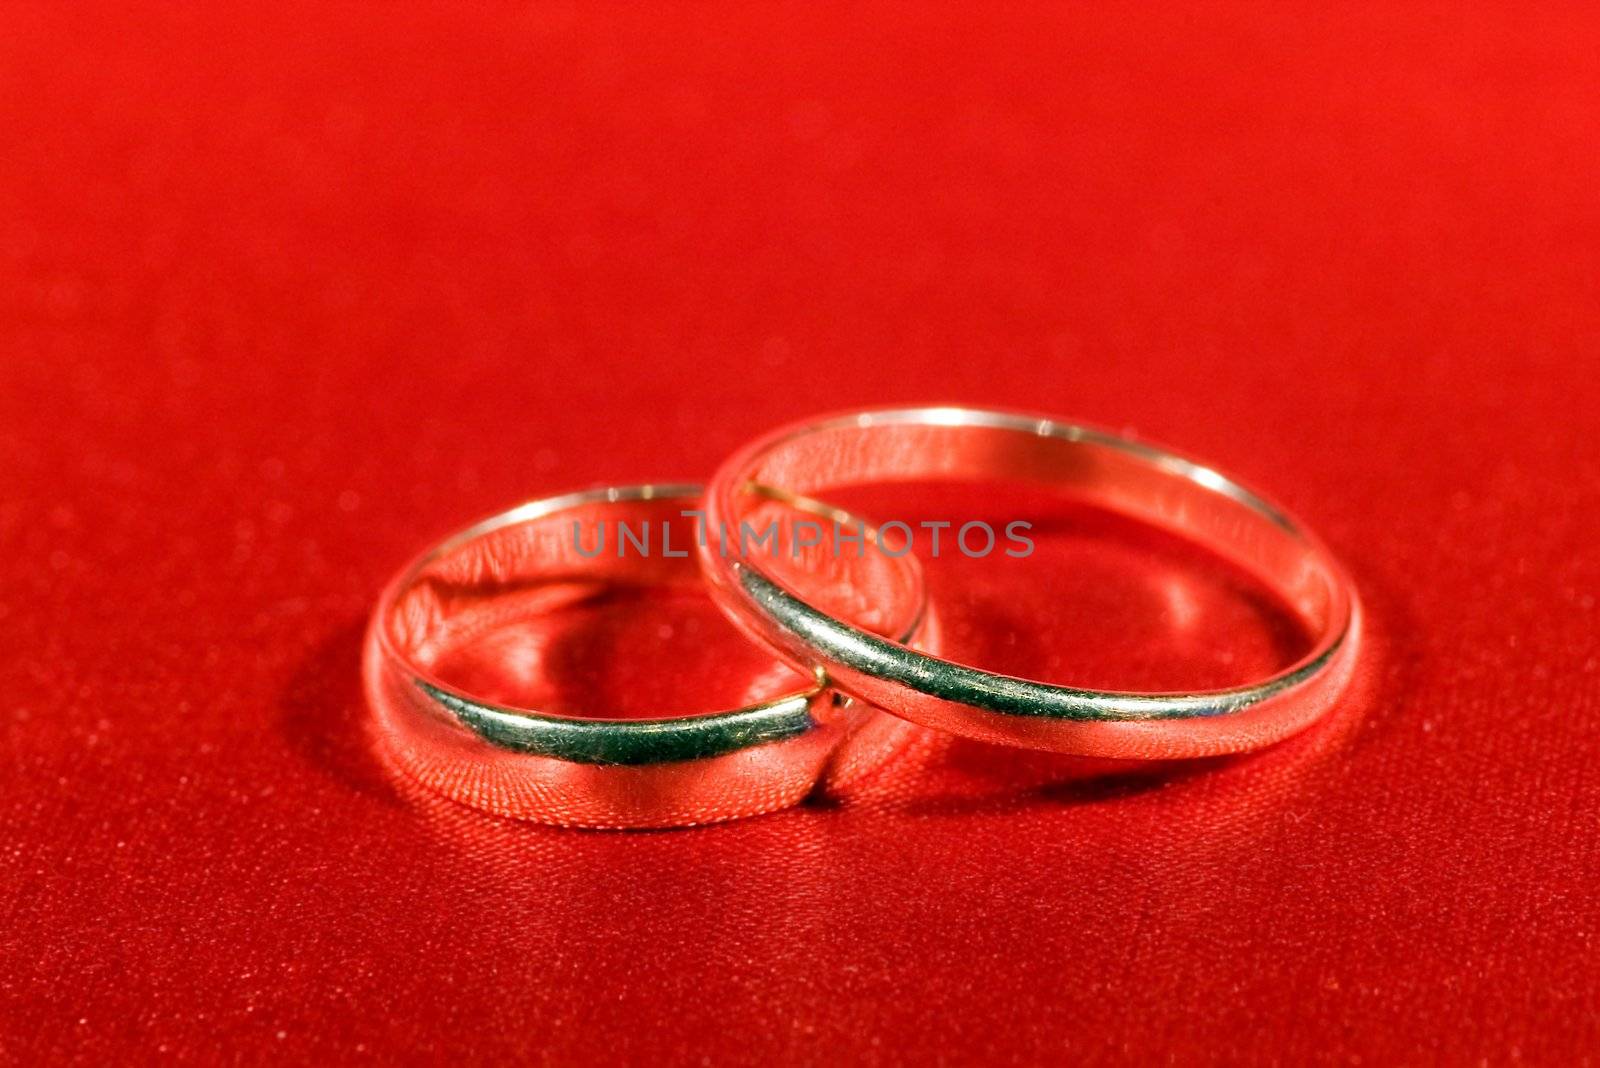 On a photo wedding rings on the red background

